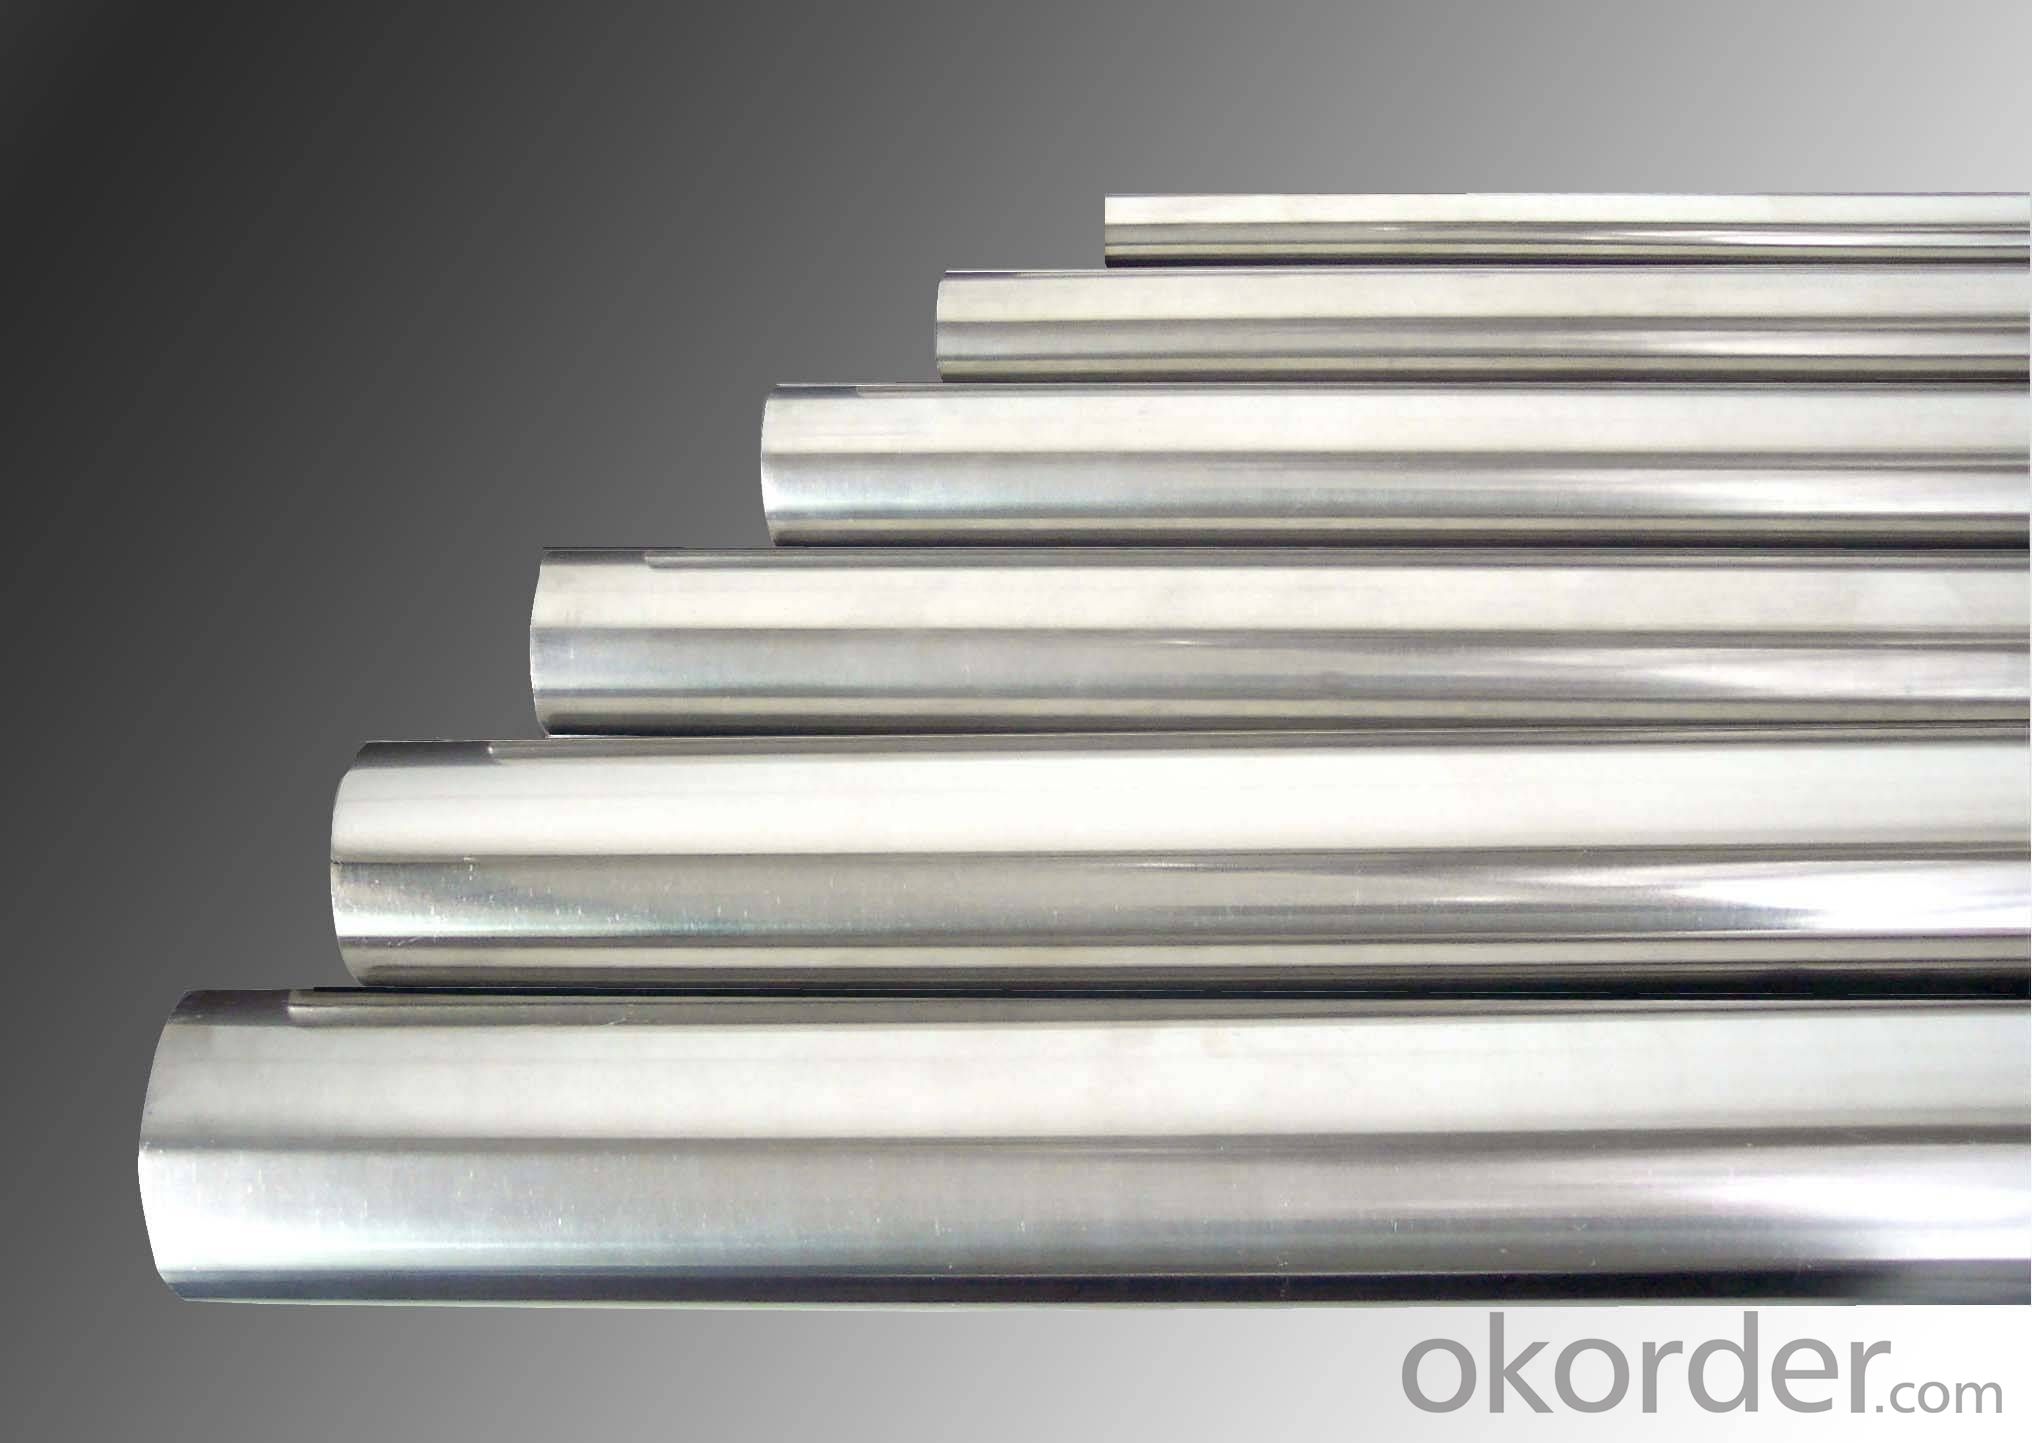 Cold Drawn API Thin Wall Stainless Steel Pipe